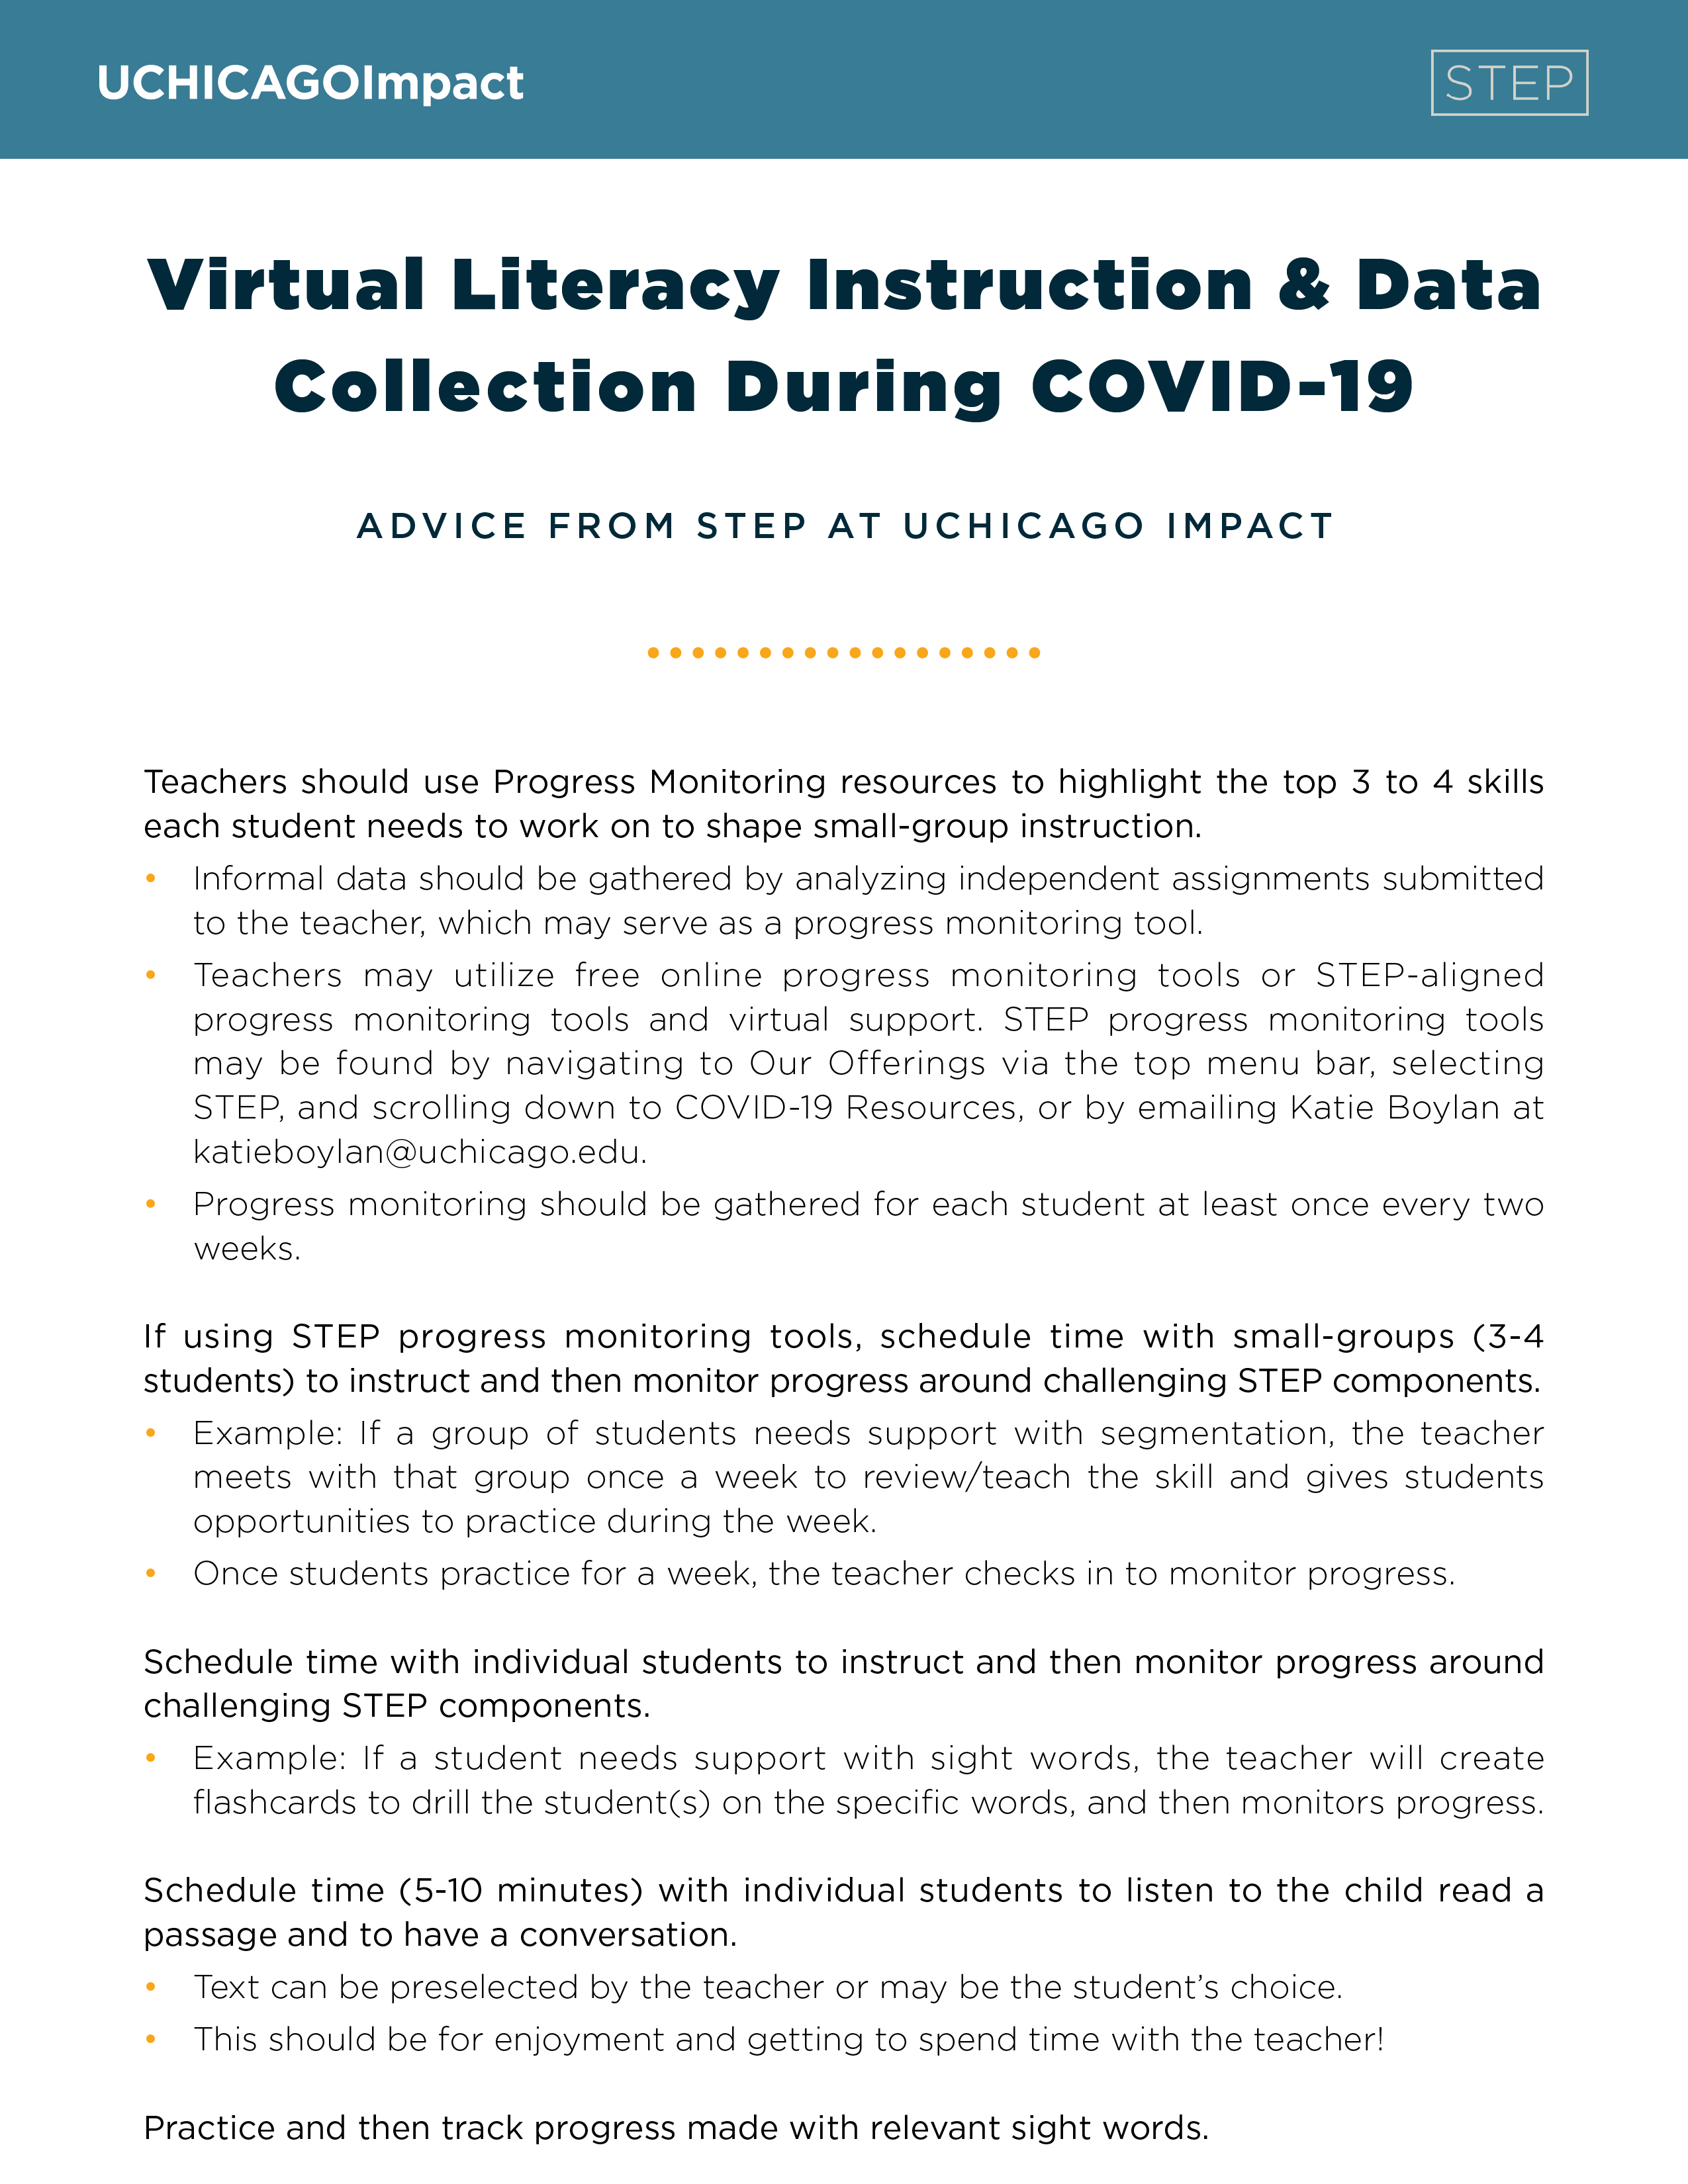 Virtual Literacy Instruction & Data Collection During COVID-19: Advice from STEP at UChicago Impact